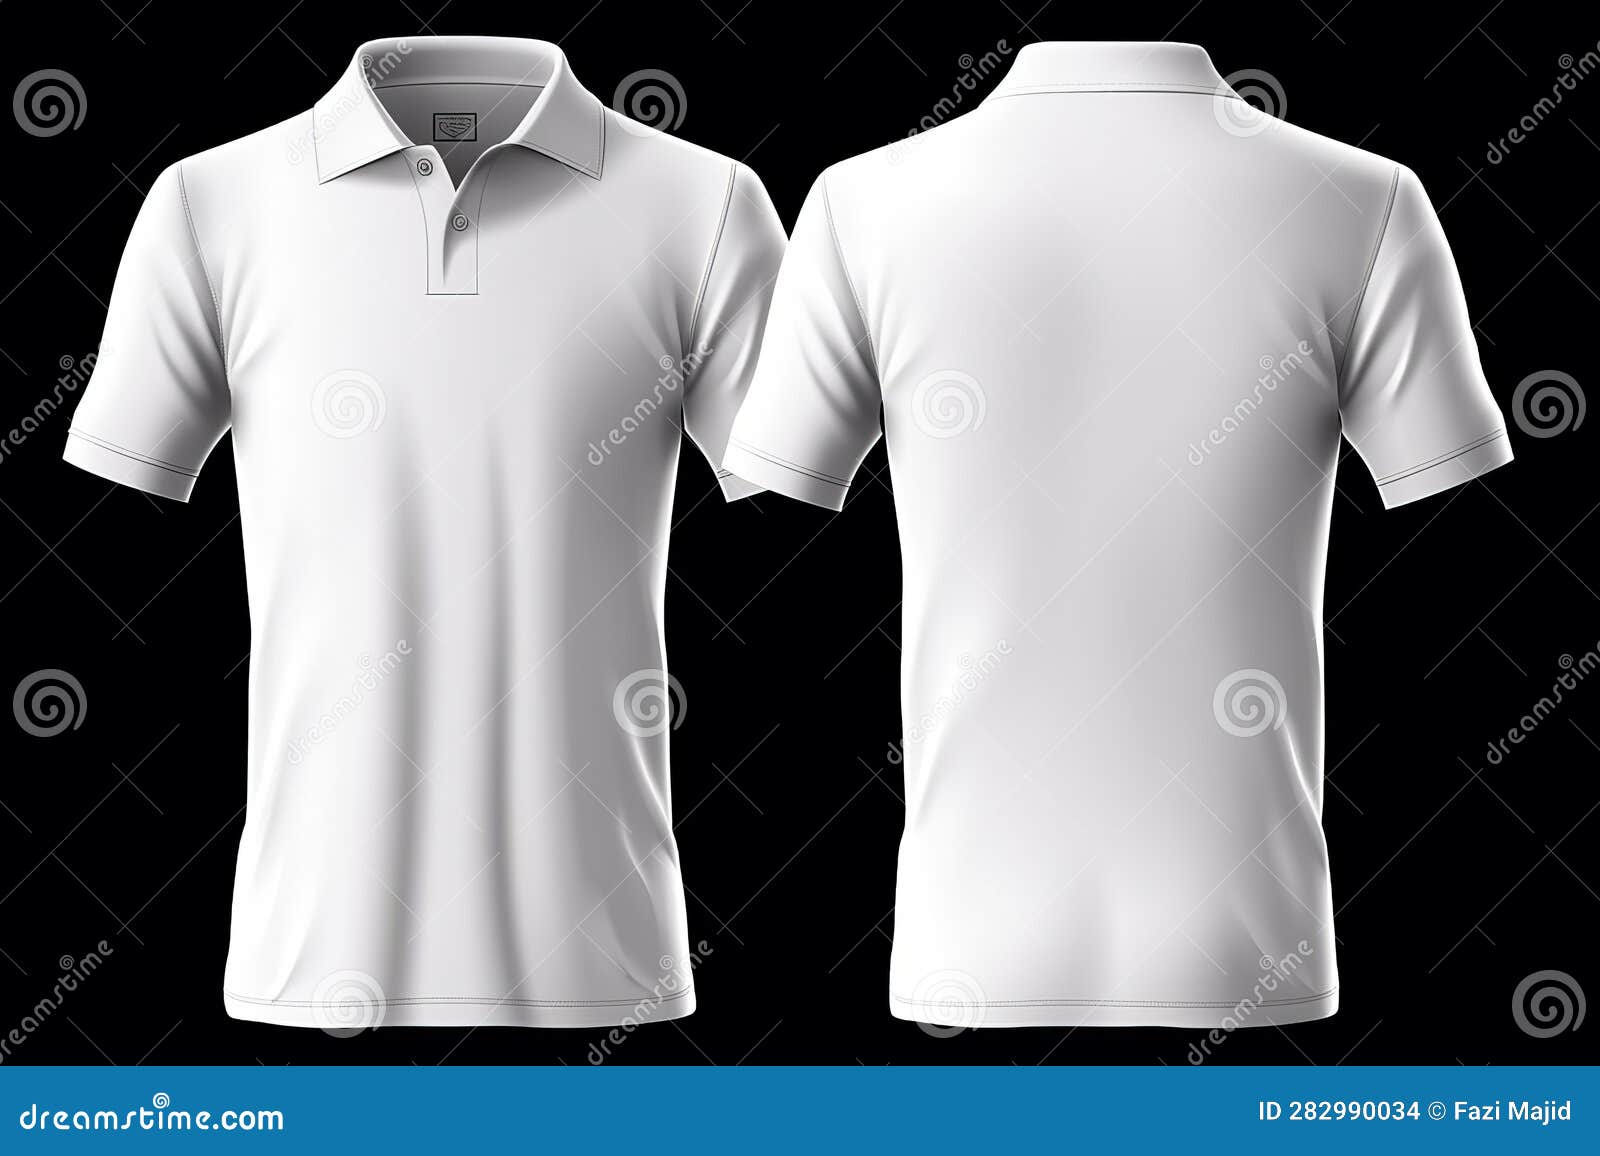 Blank Collared Shirt Mock Up Template, Front and Back View, Isolated on ...